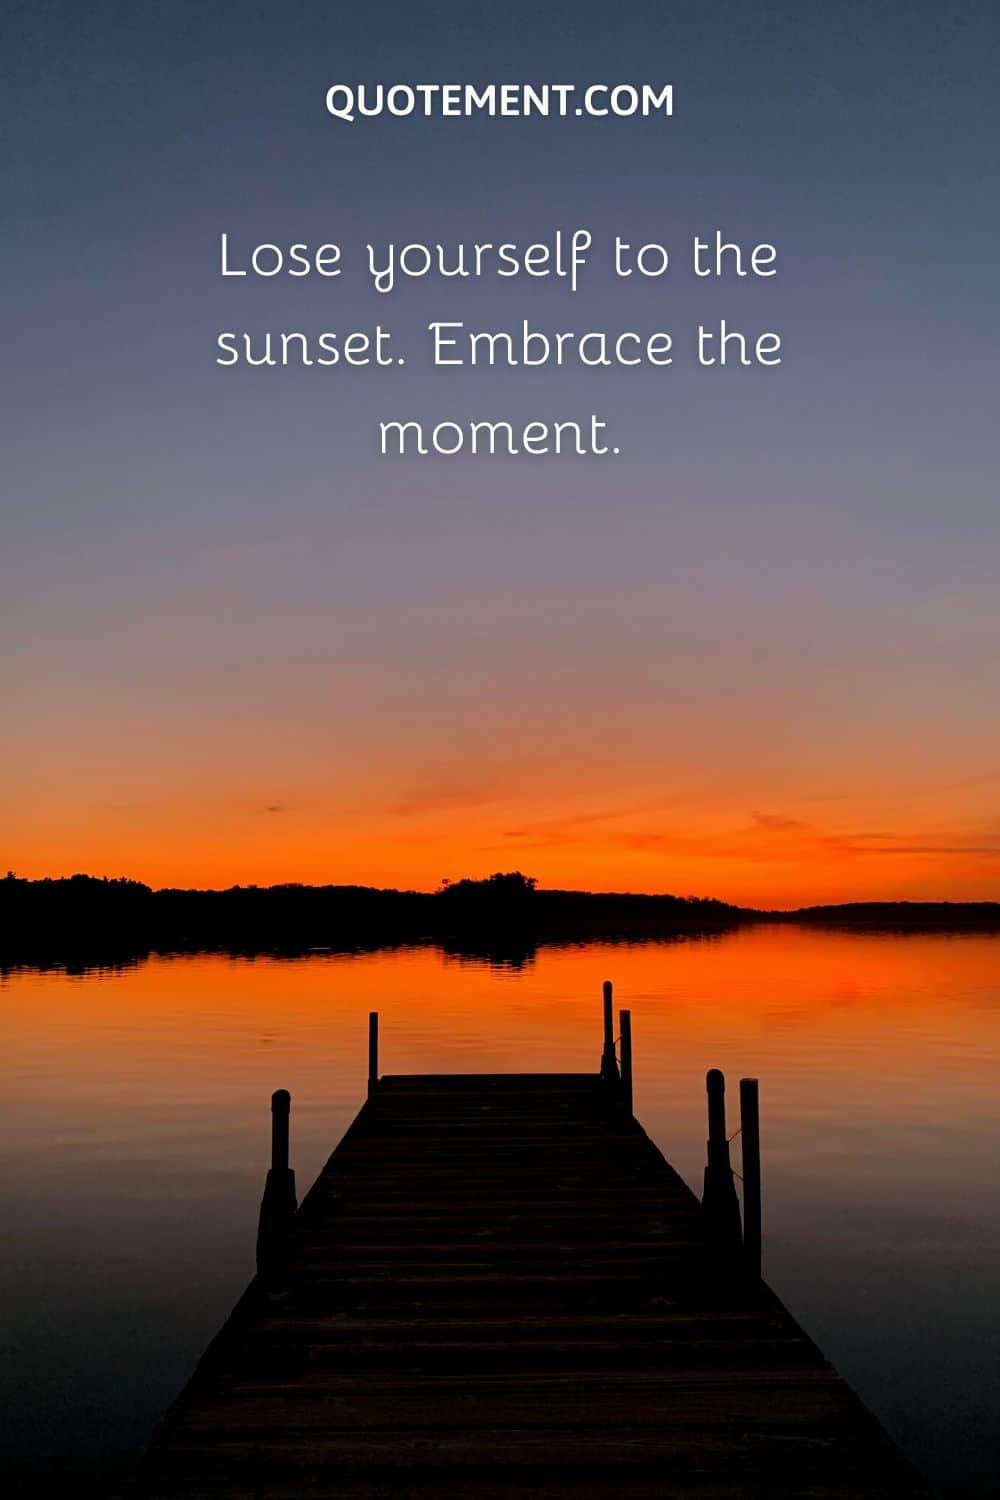 Lose yourself to the sunset. Embrace the moment.